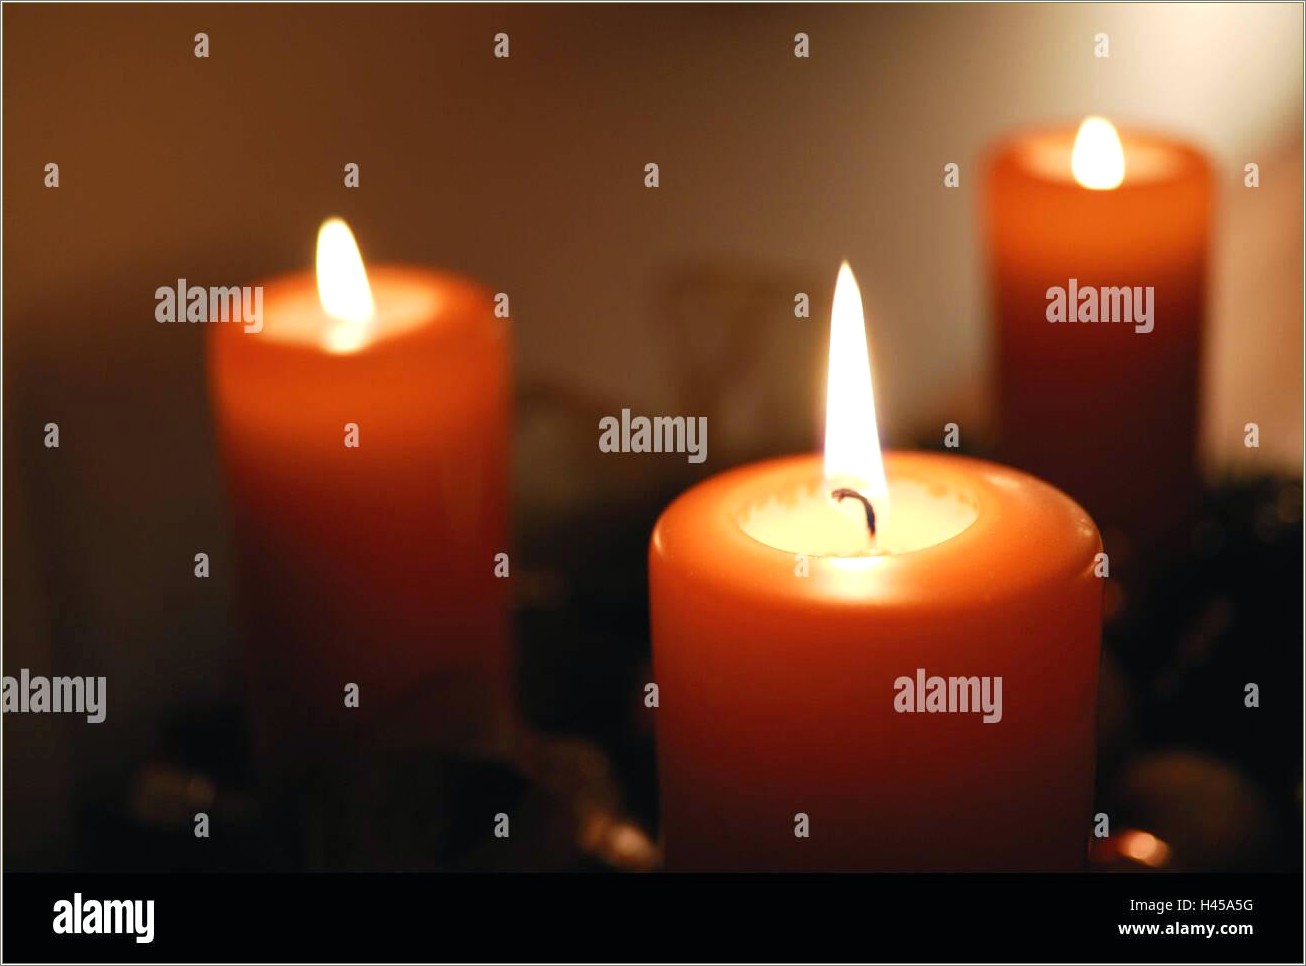 Free Download Animated Candle Powerpoint Templates